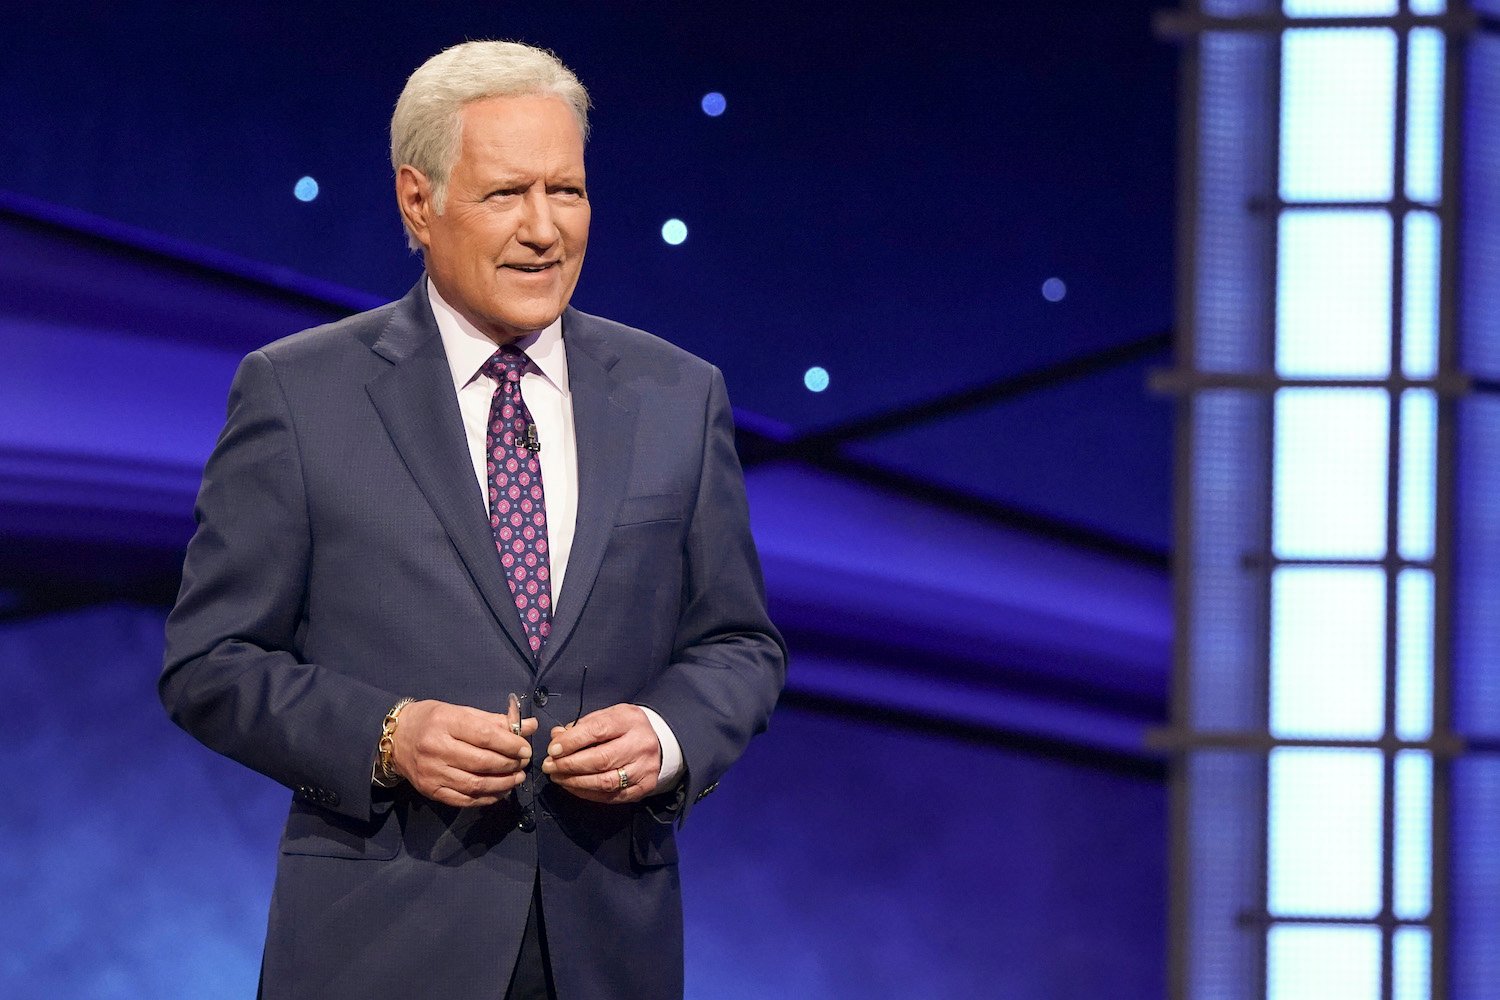 Alex Trebek on 'Jeopardy!' The Greatest of All Time tournament